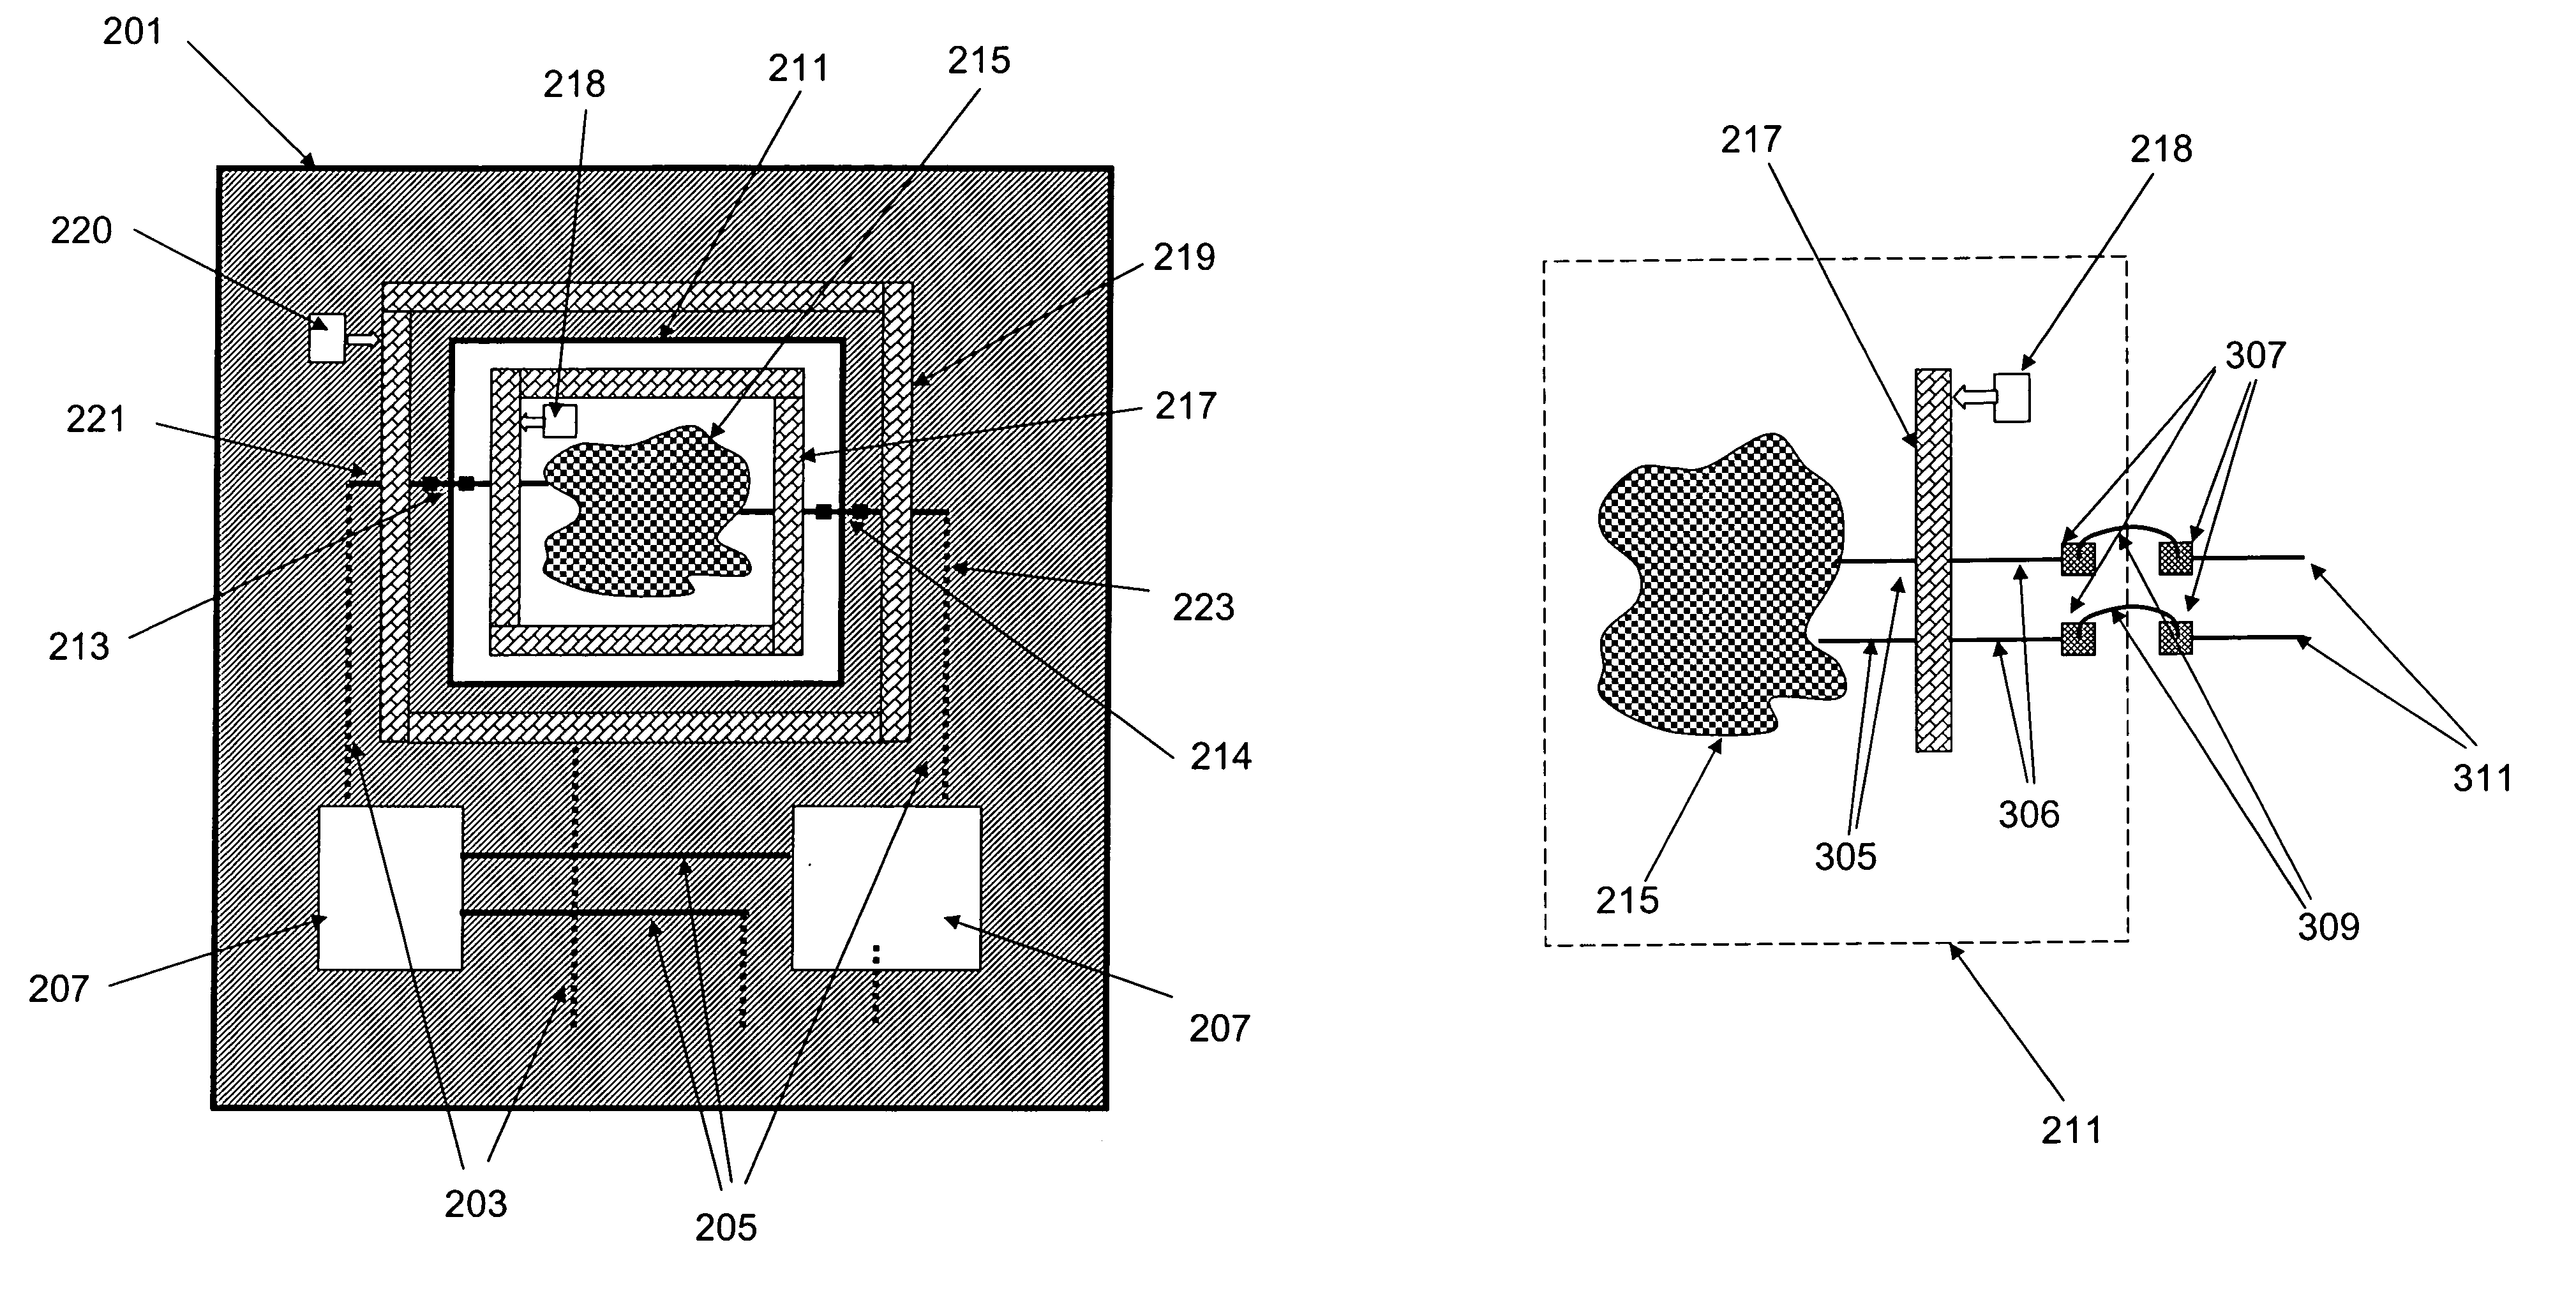 Hybrid semiconductor circuit with programmable intraconnectivity